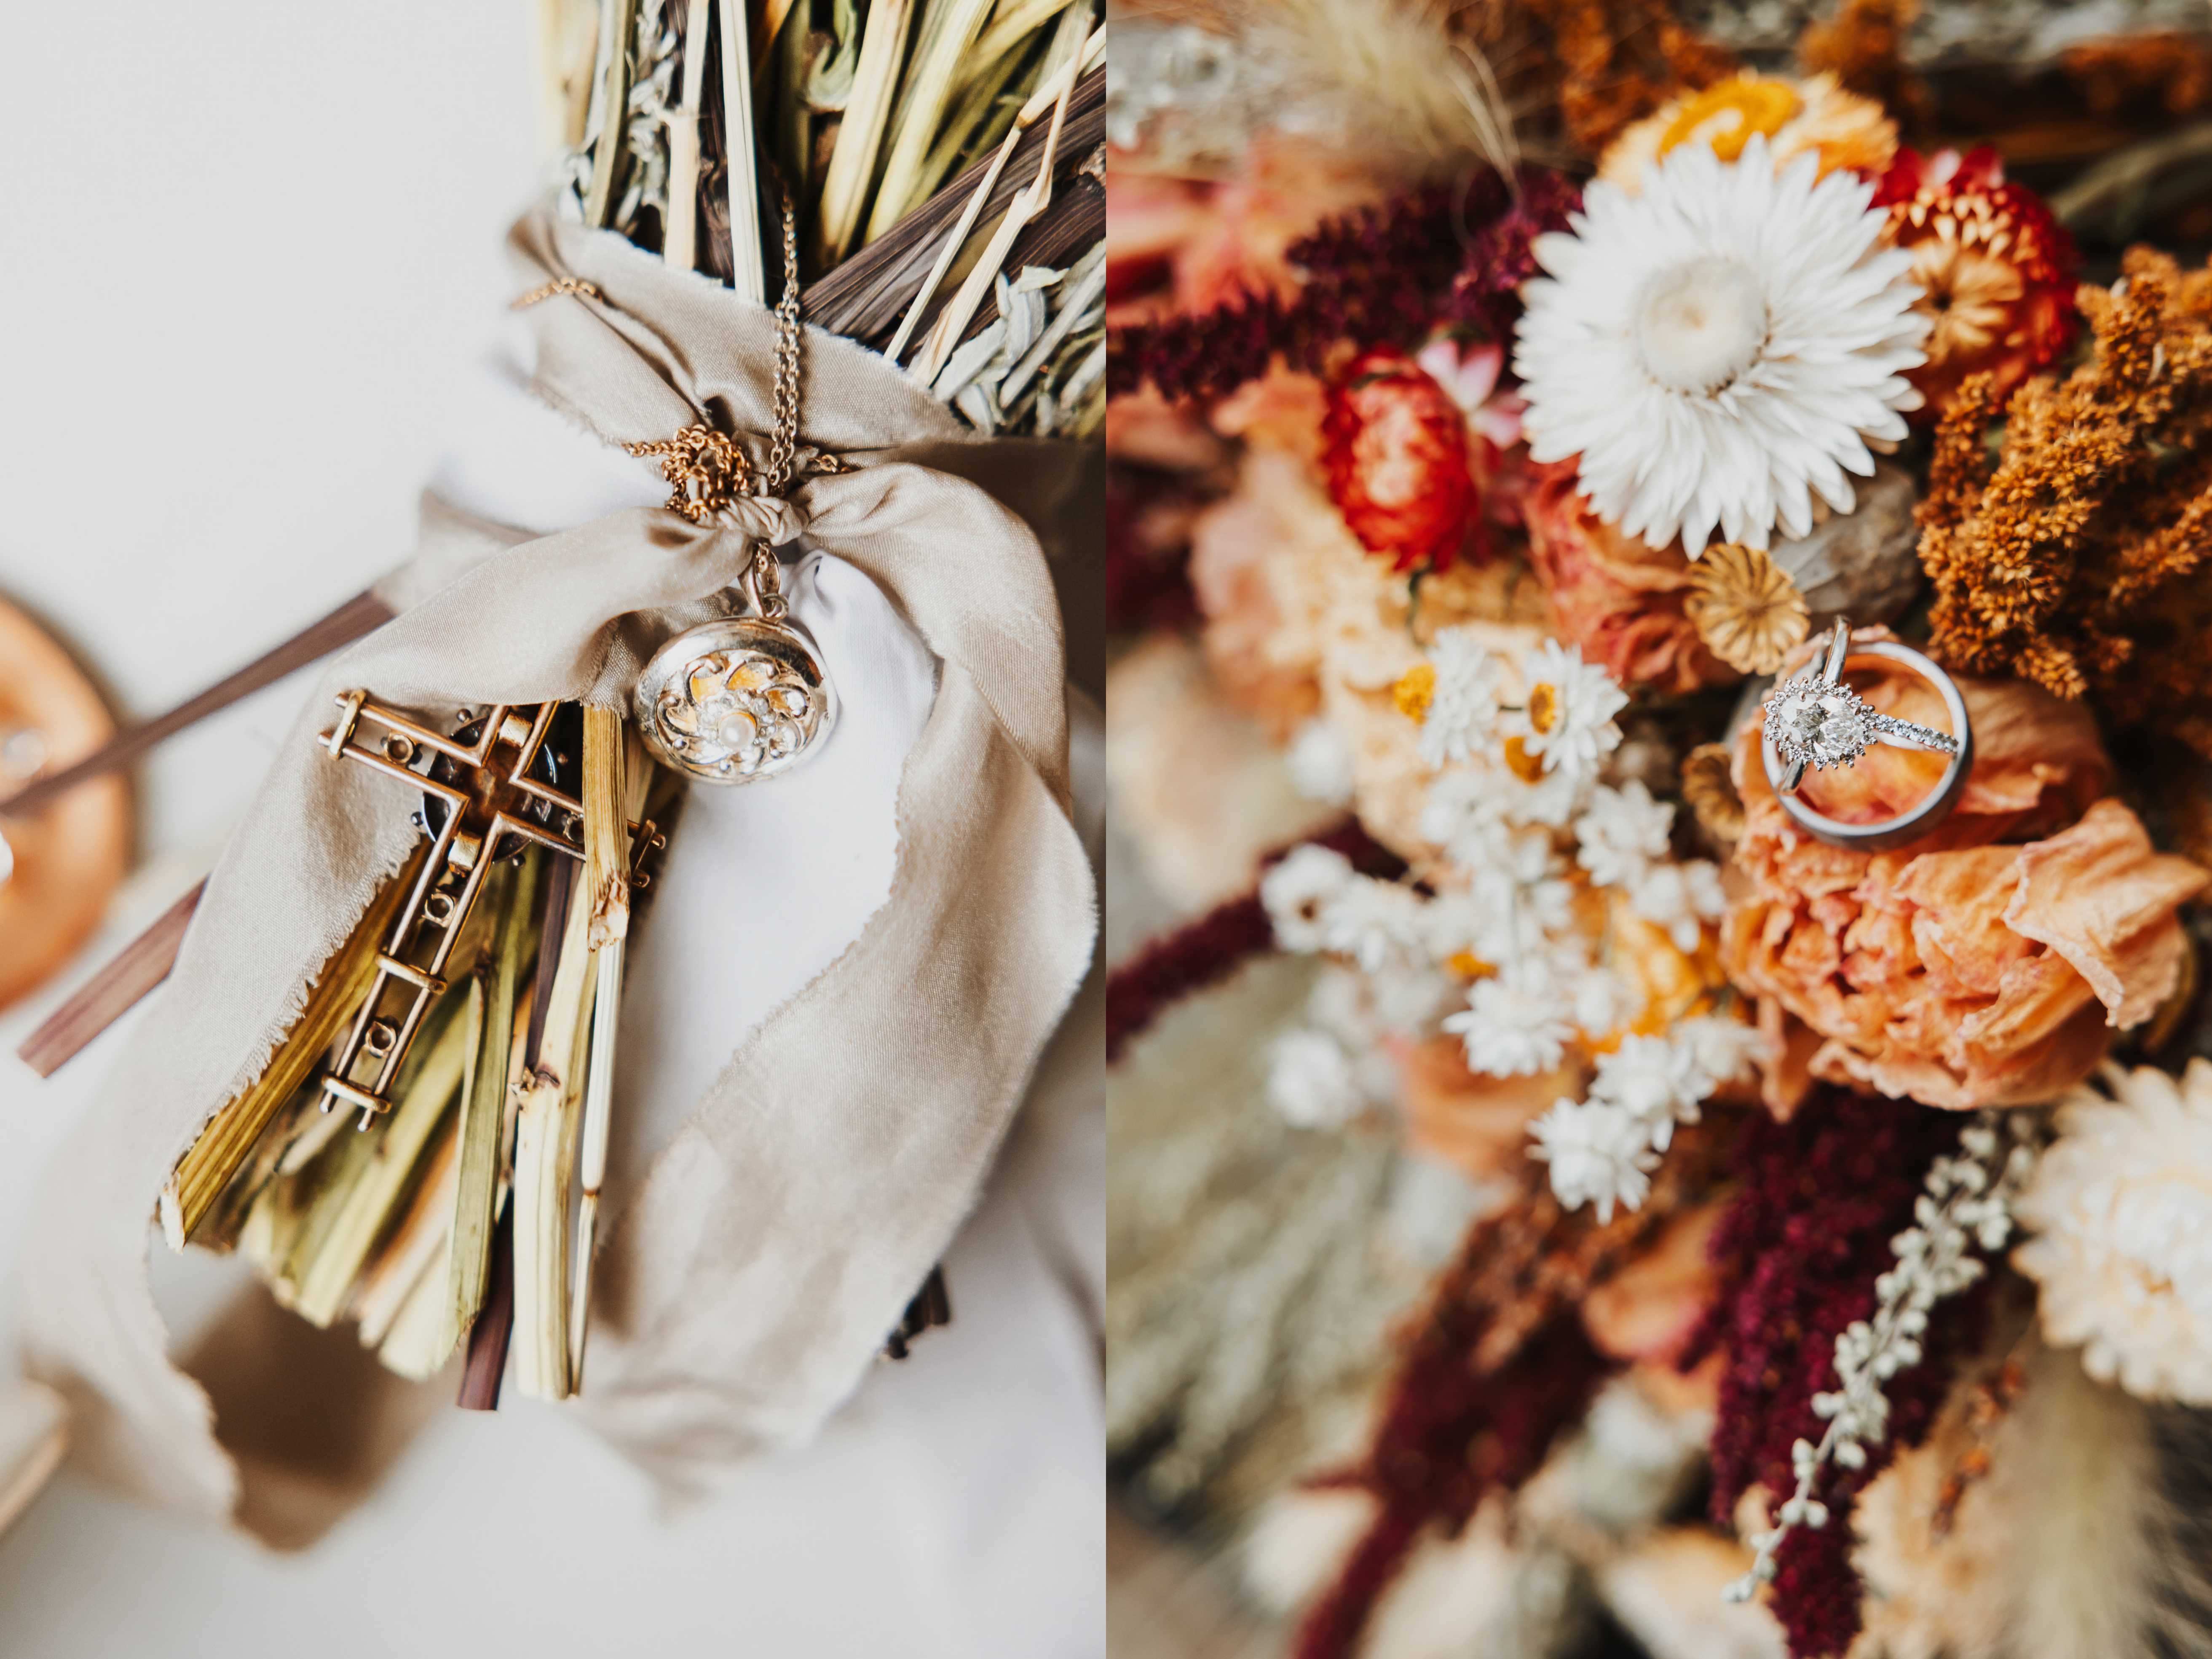 2 photos side by side, the left is of a necklace wrapped around the bottom of a bouquet. the right is of wedding rings resting on flowers of the bouquet